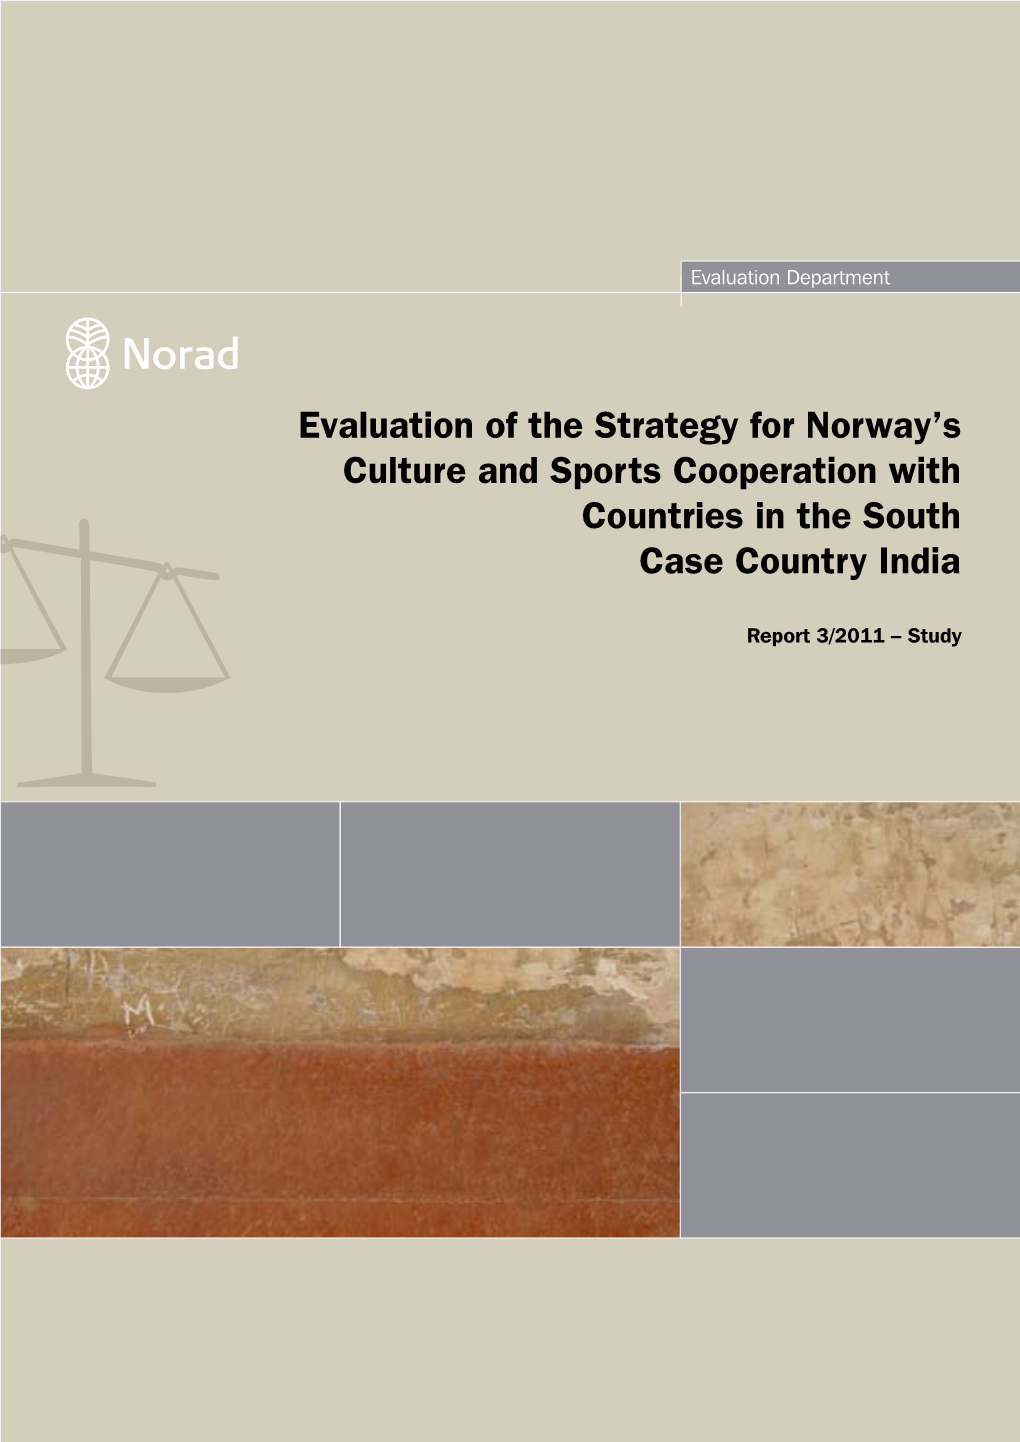 Evaluation of the Strategy for Norway's Culture and Sports Cooperation